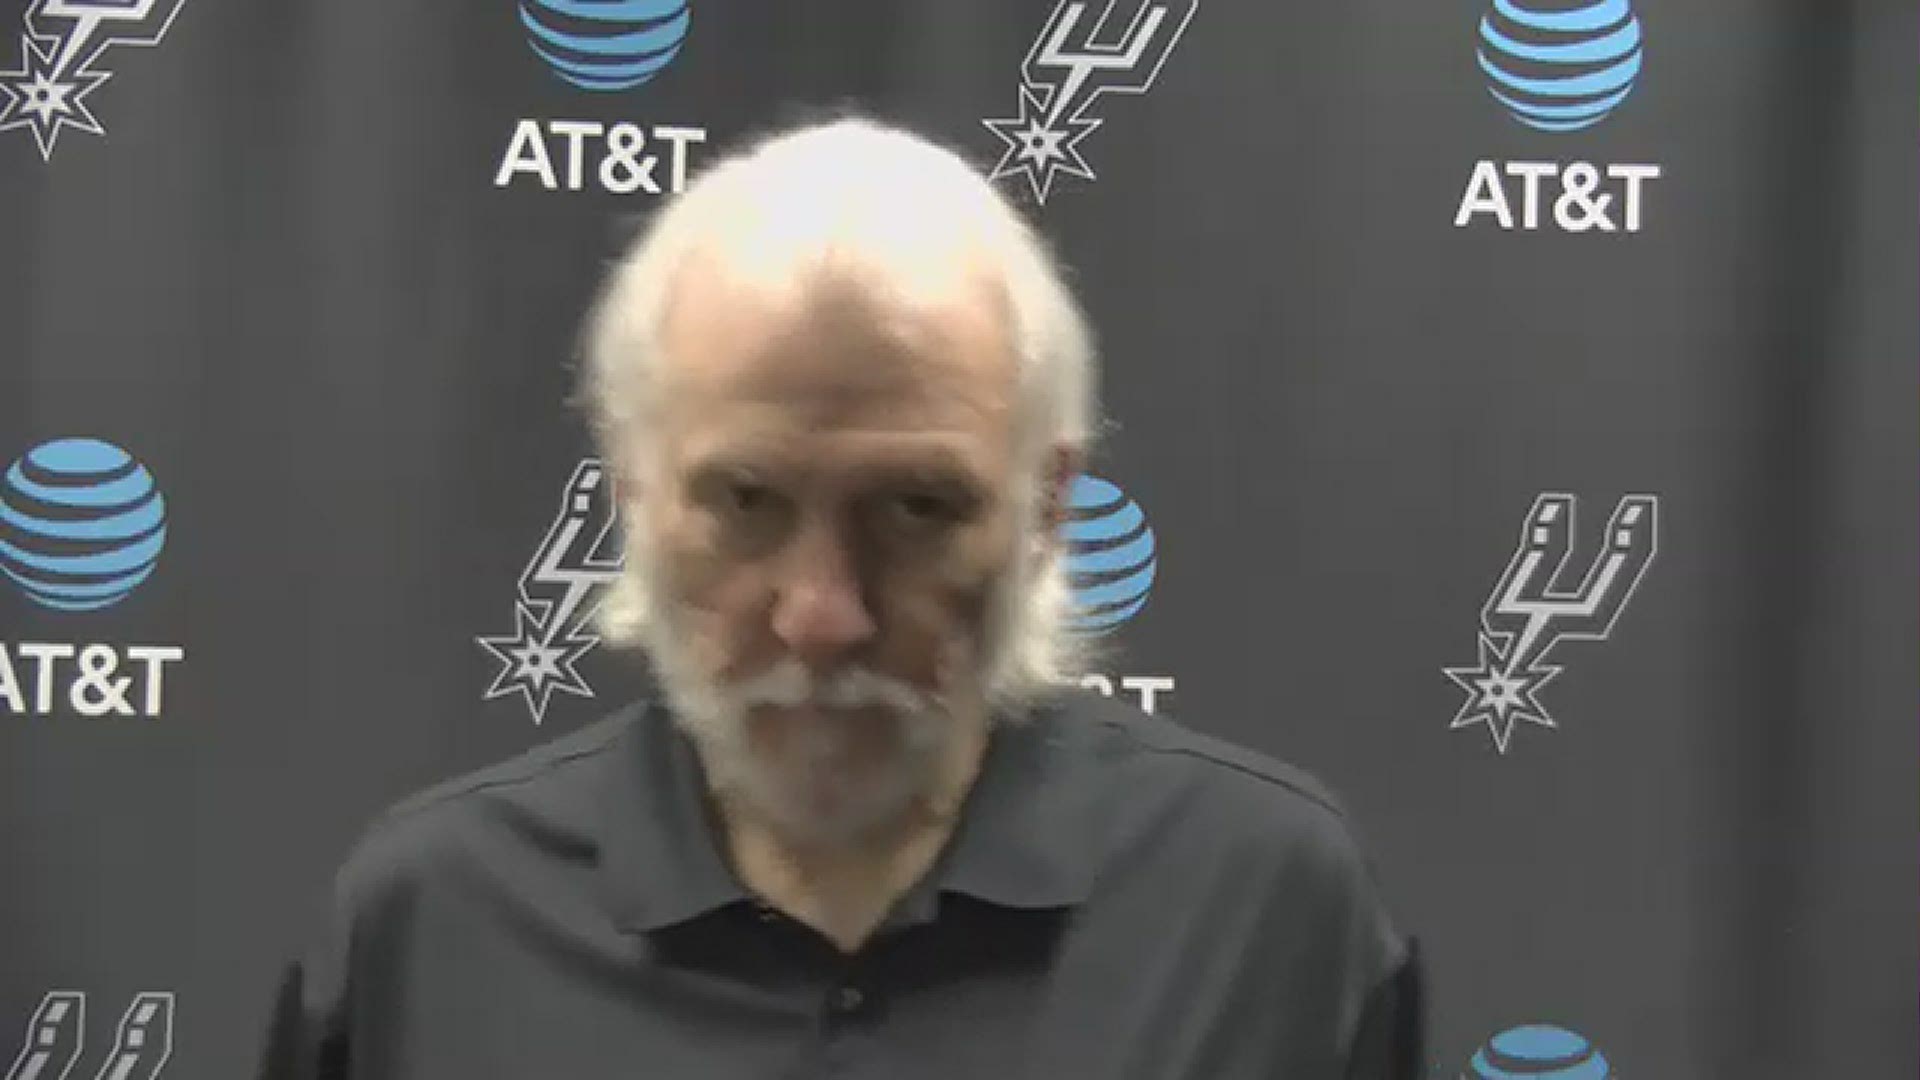 Popovich spoke about the passing of former Spurs coach Stan Albeck, who spent significant time around the team after suffering a stroke 19 years ago.